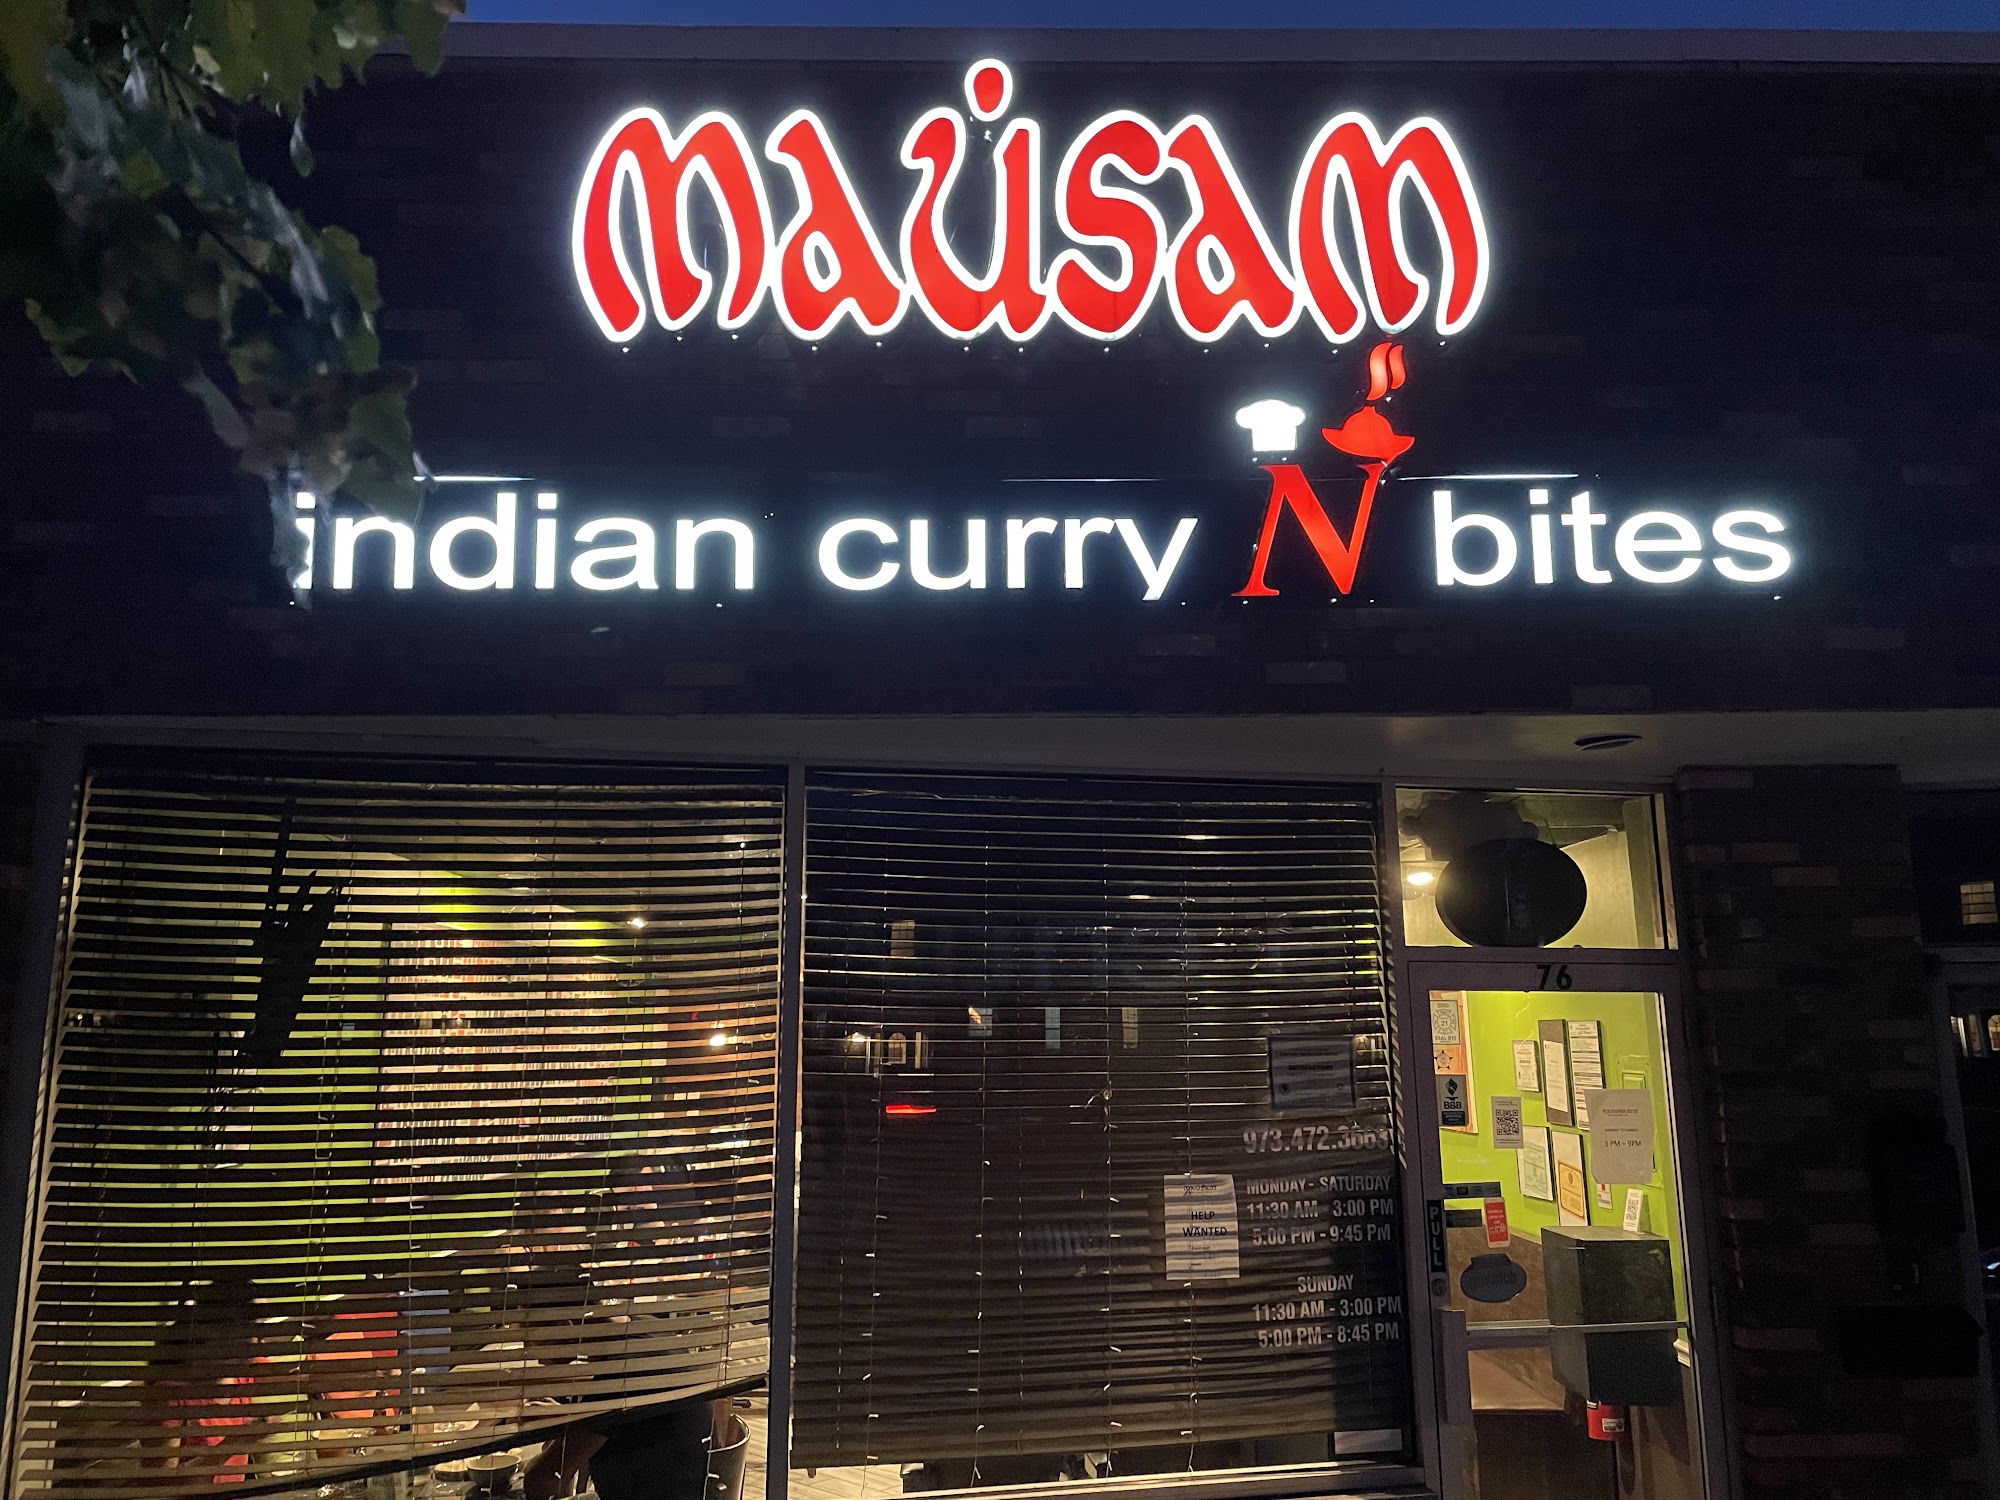 Mausam Indian Curry N Bites